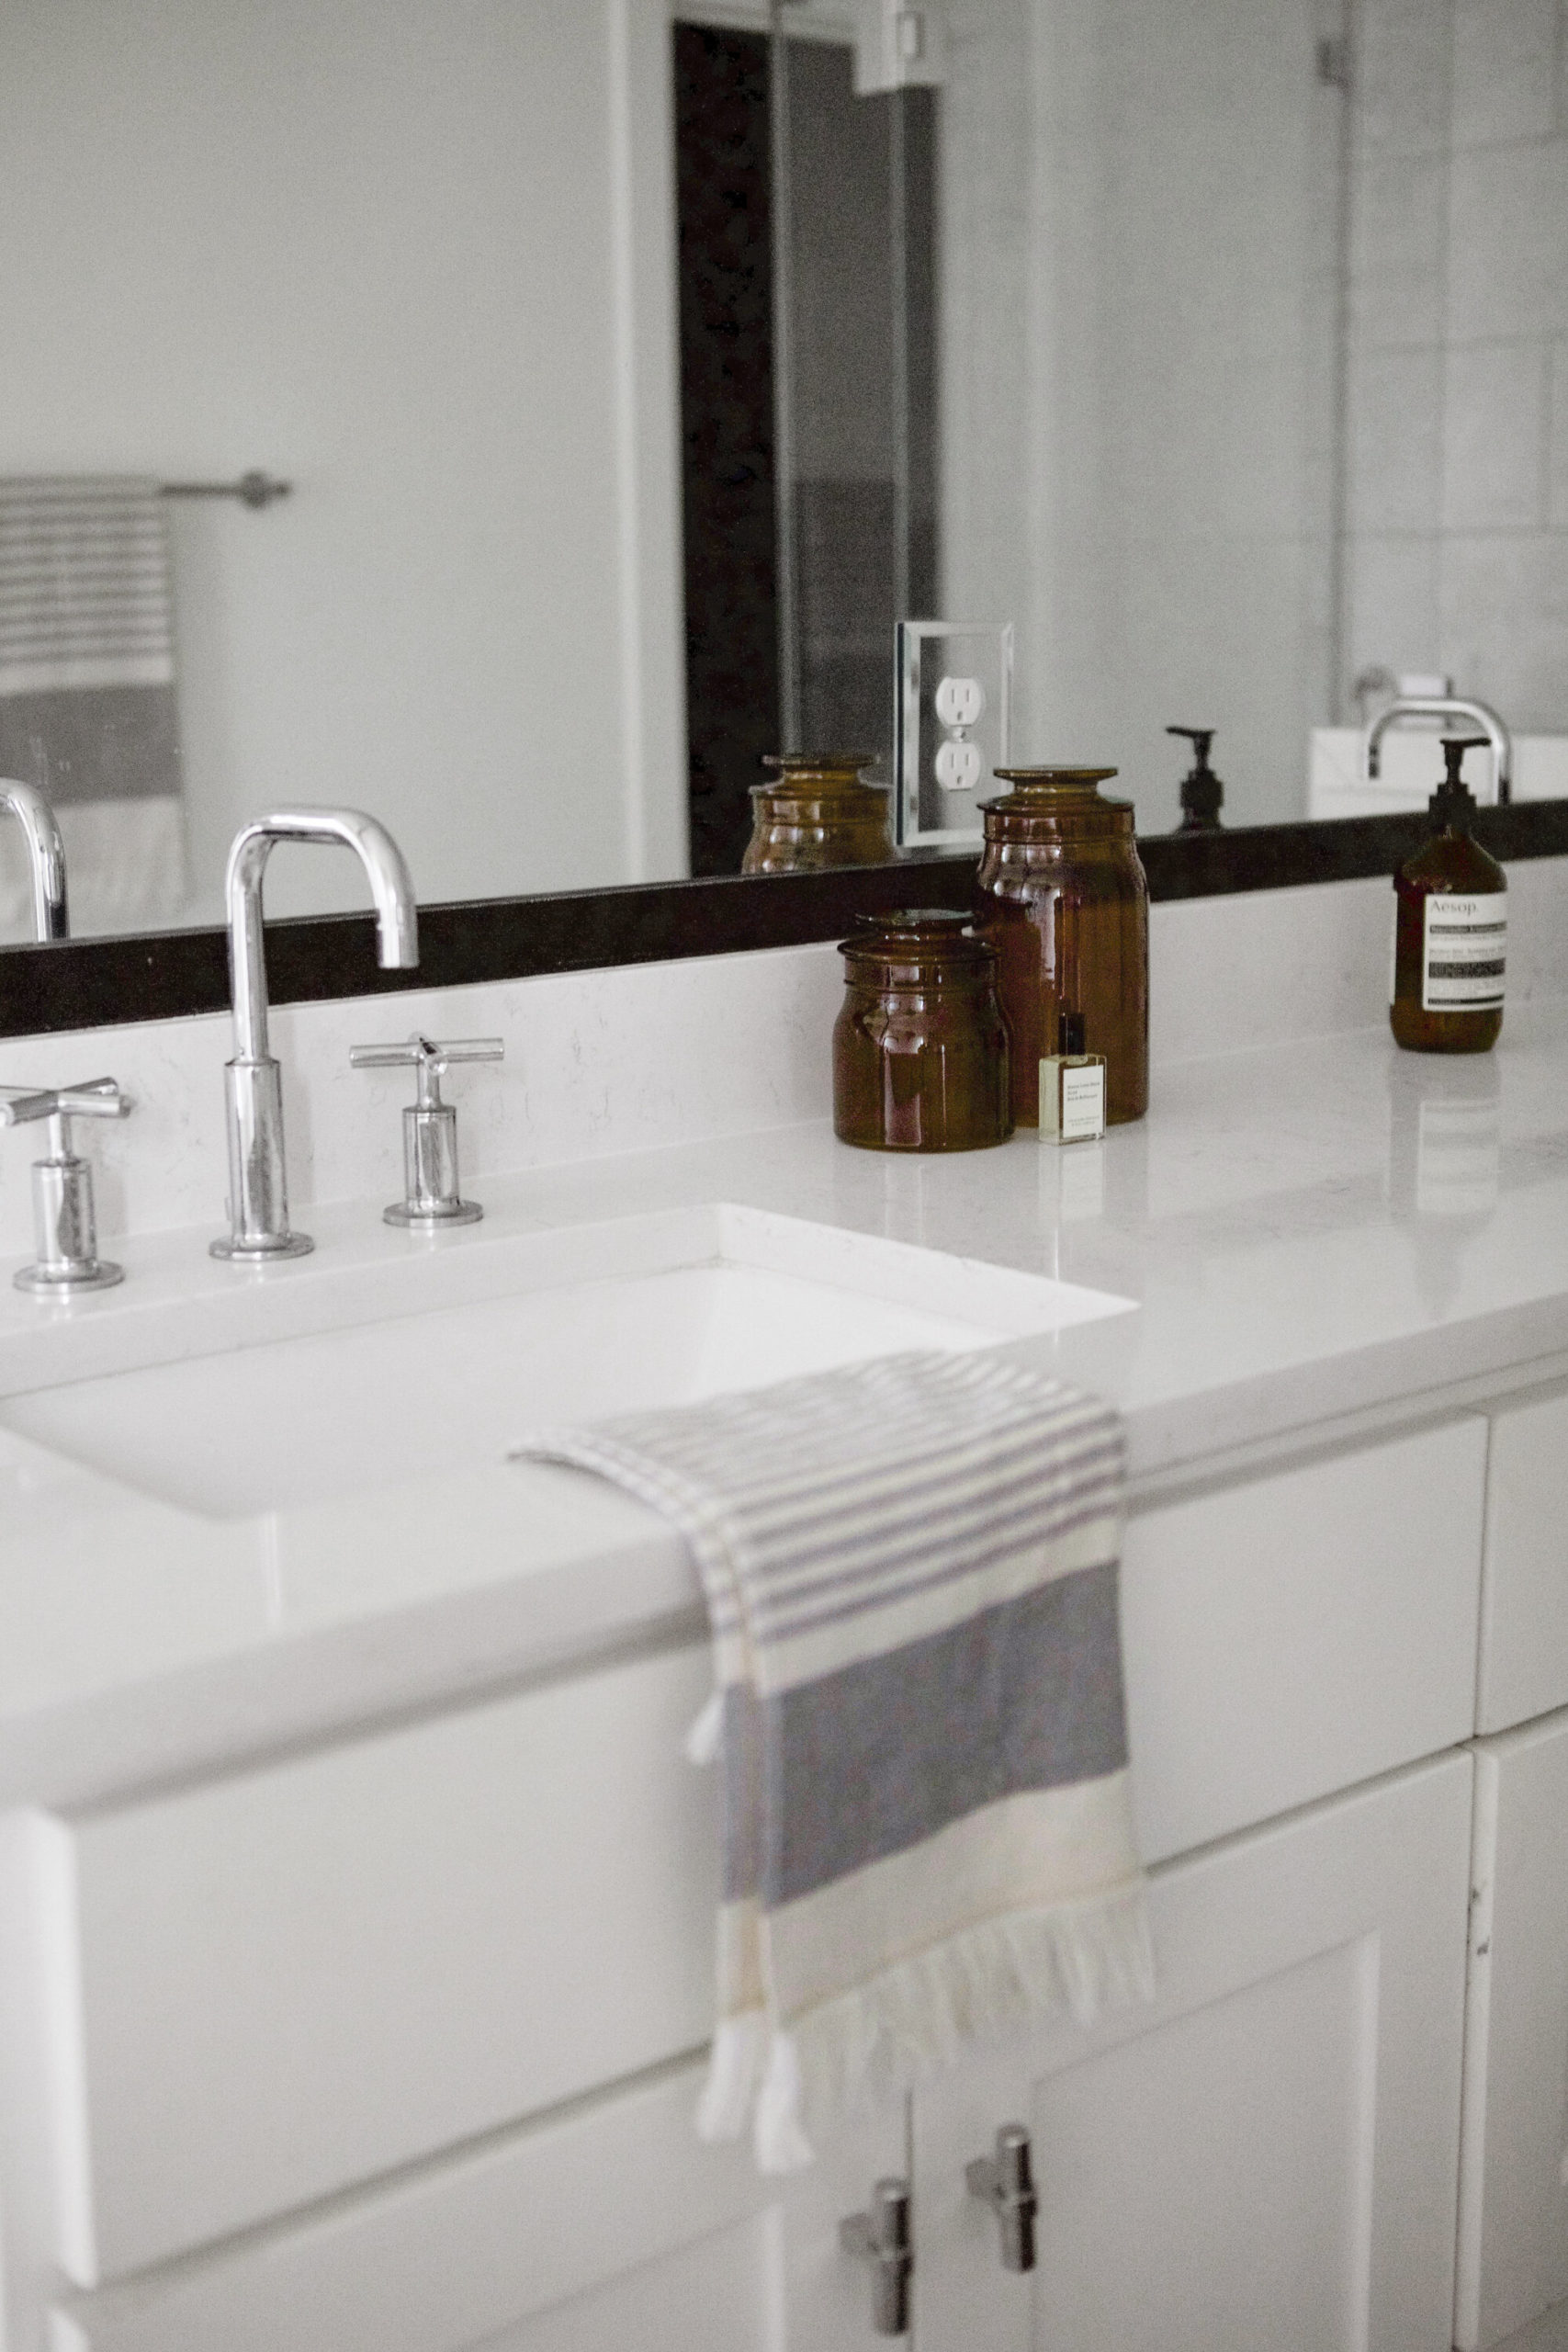 Hand Towel // Faucets // Cabinet Hardware // Amber Glass Canisters // Hand Soap // Perfume